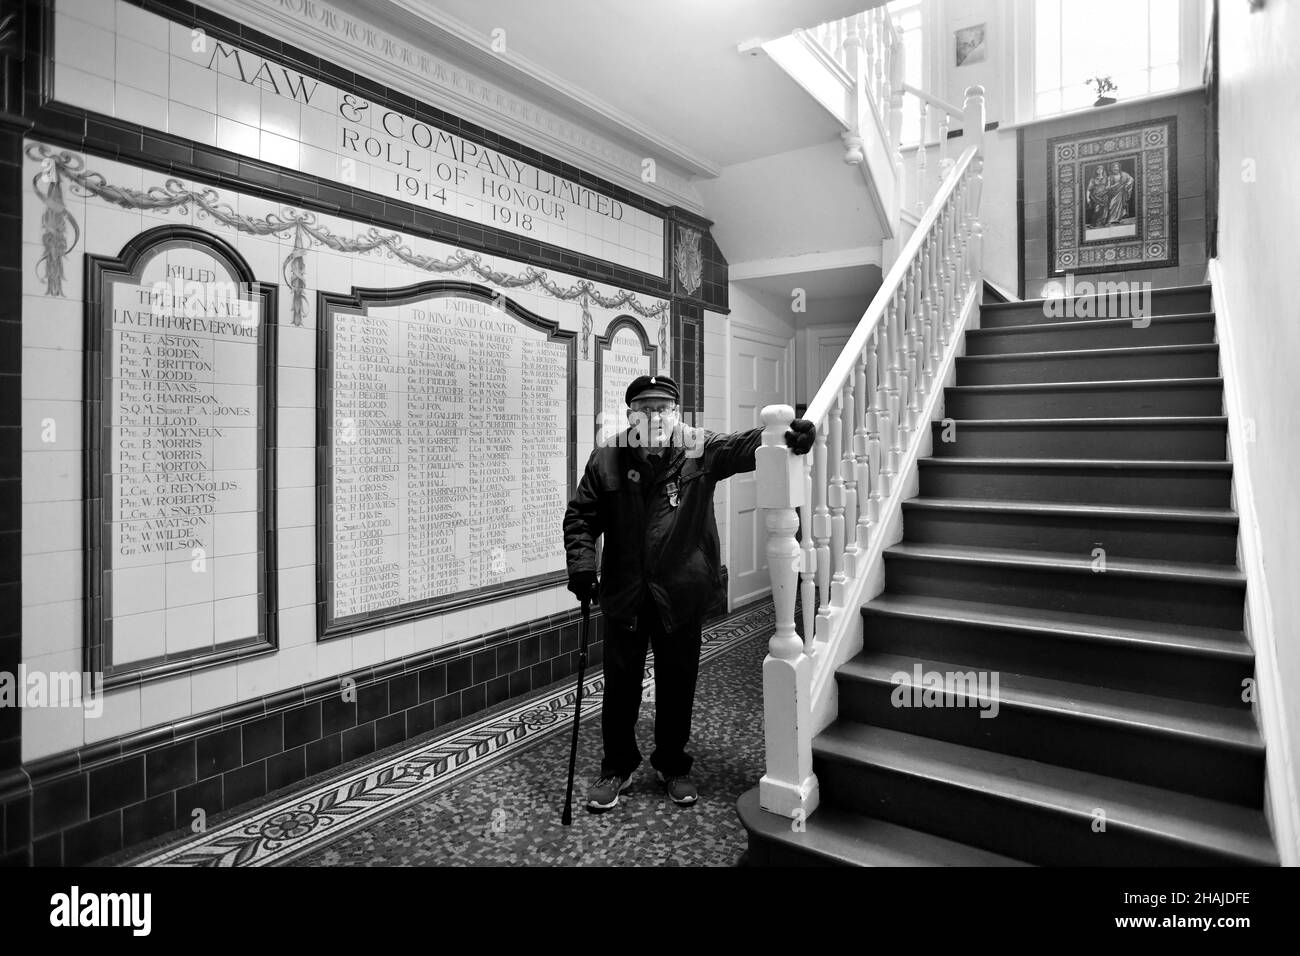 World War Two veteran Ron Miles with the historic Maw & Company Limited 'Roll of Honour' made in glazed tiles by the tile maker Stock Photo